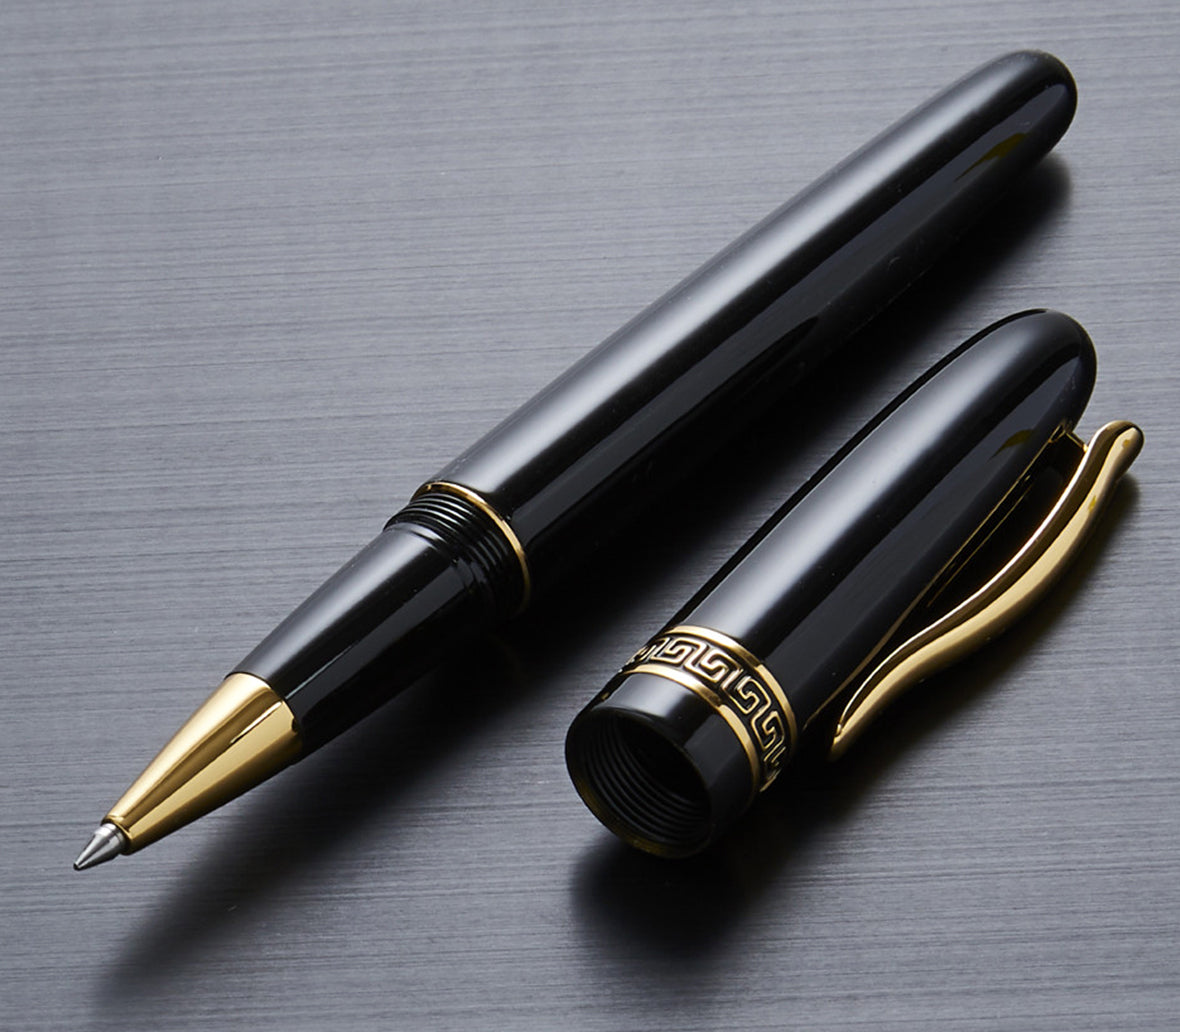 Xezo - Uncapped Phantom Classic Black R rollerball pen with its cap resting next to it